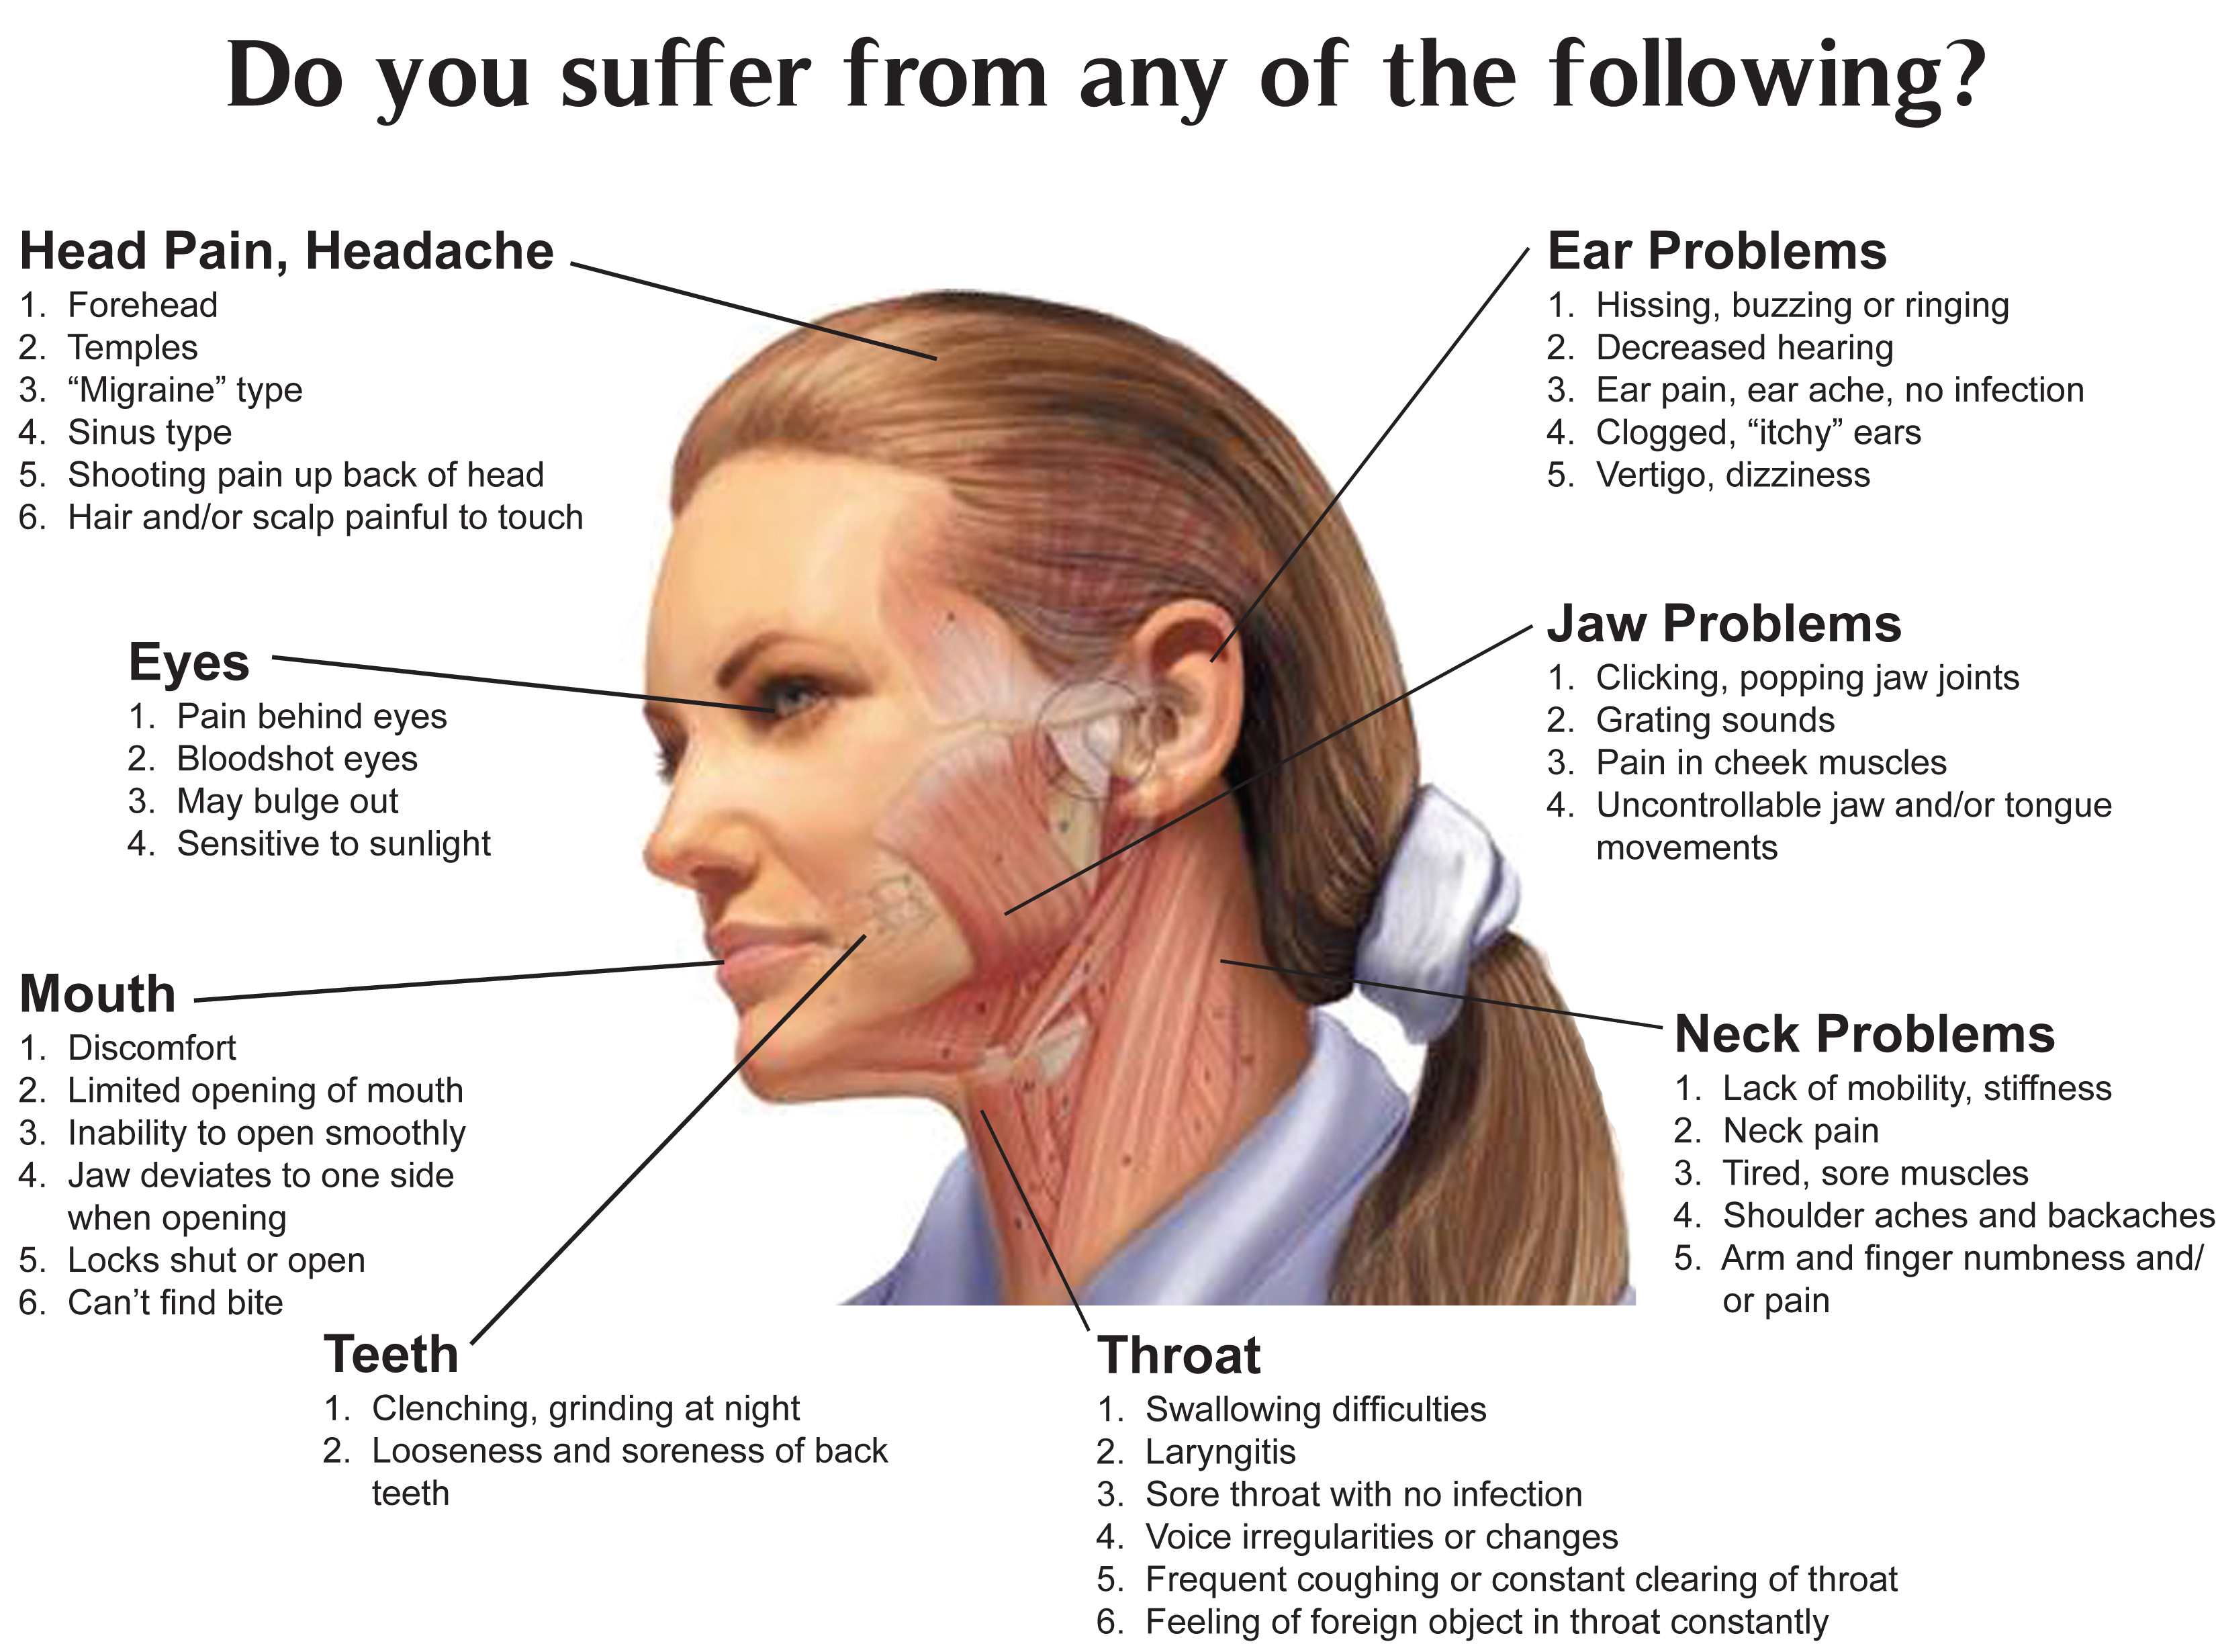 Fort Wayne Smiles, PC » Headaches-The Dental Connection